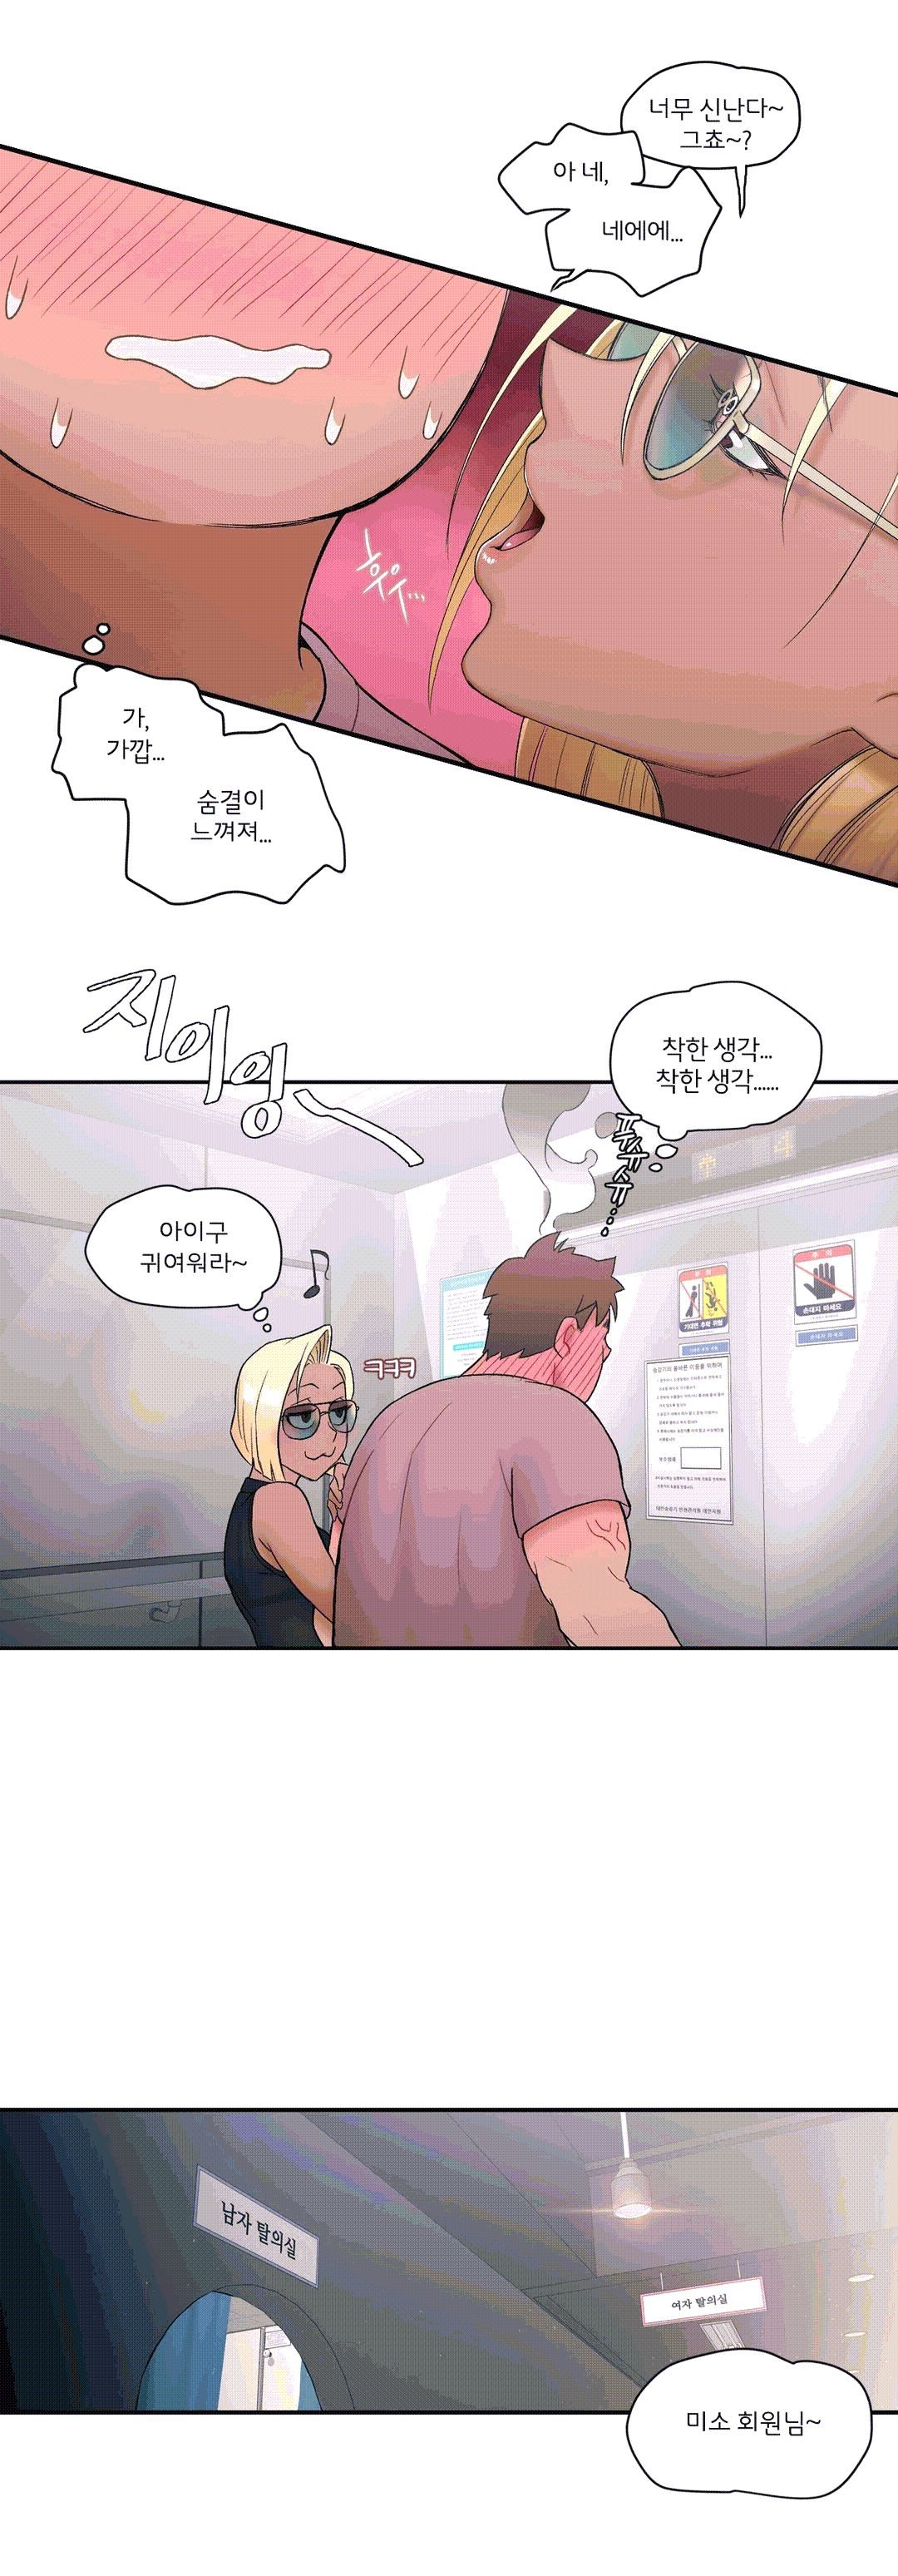 Sexercise Raw - Chapter 9 Page 10